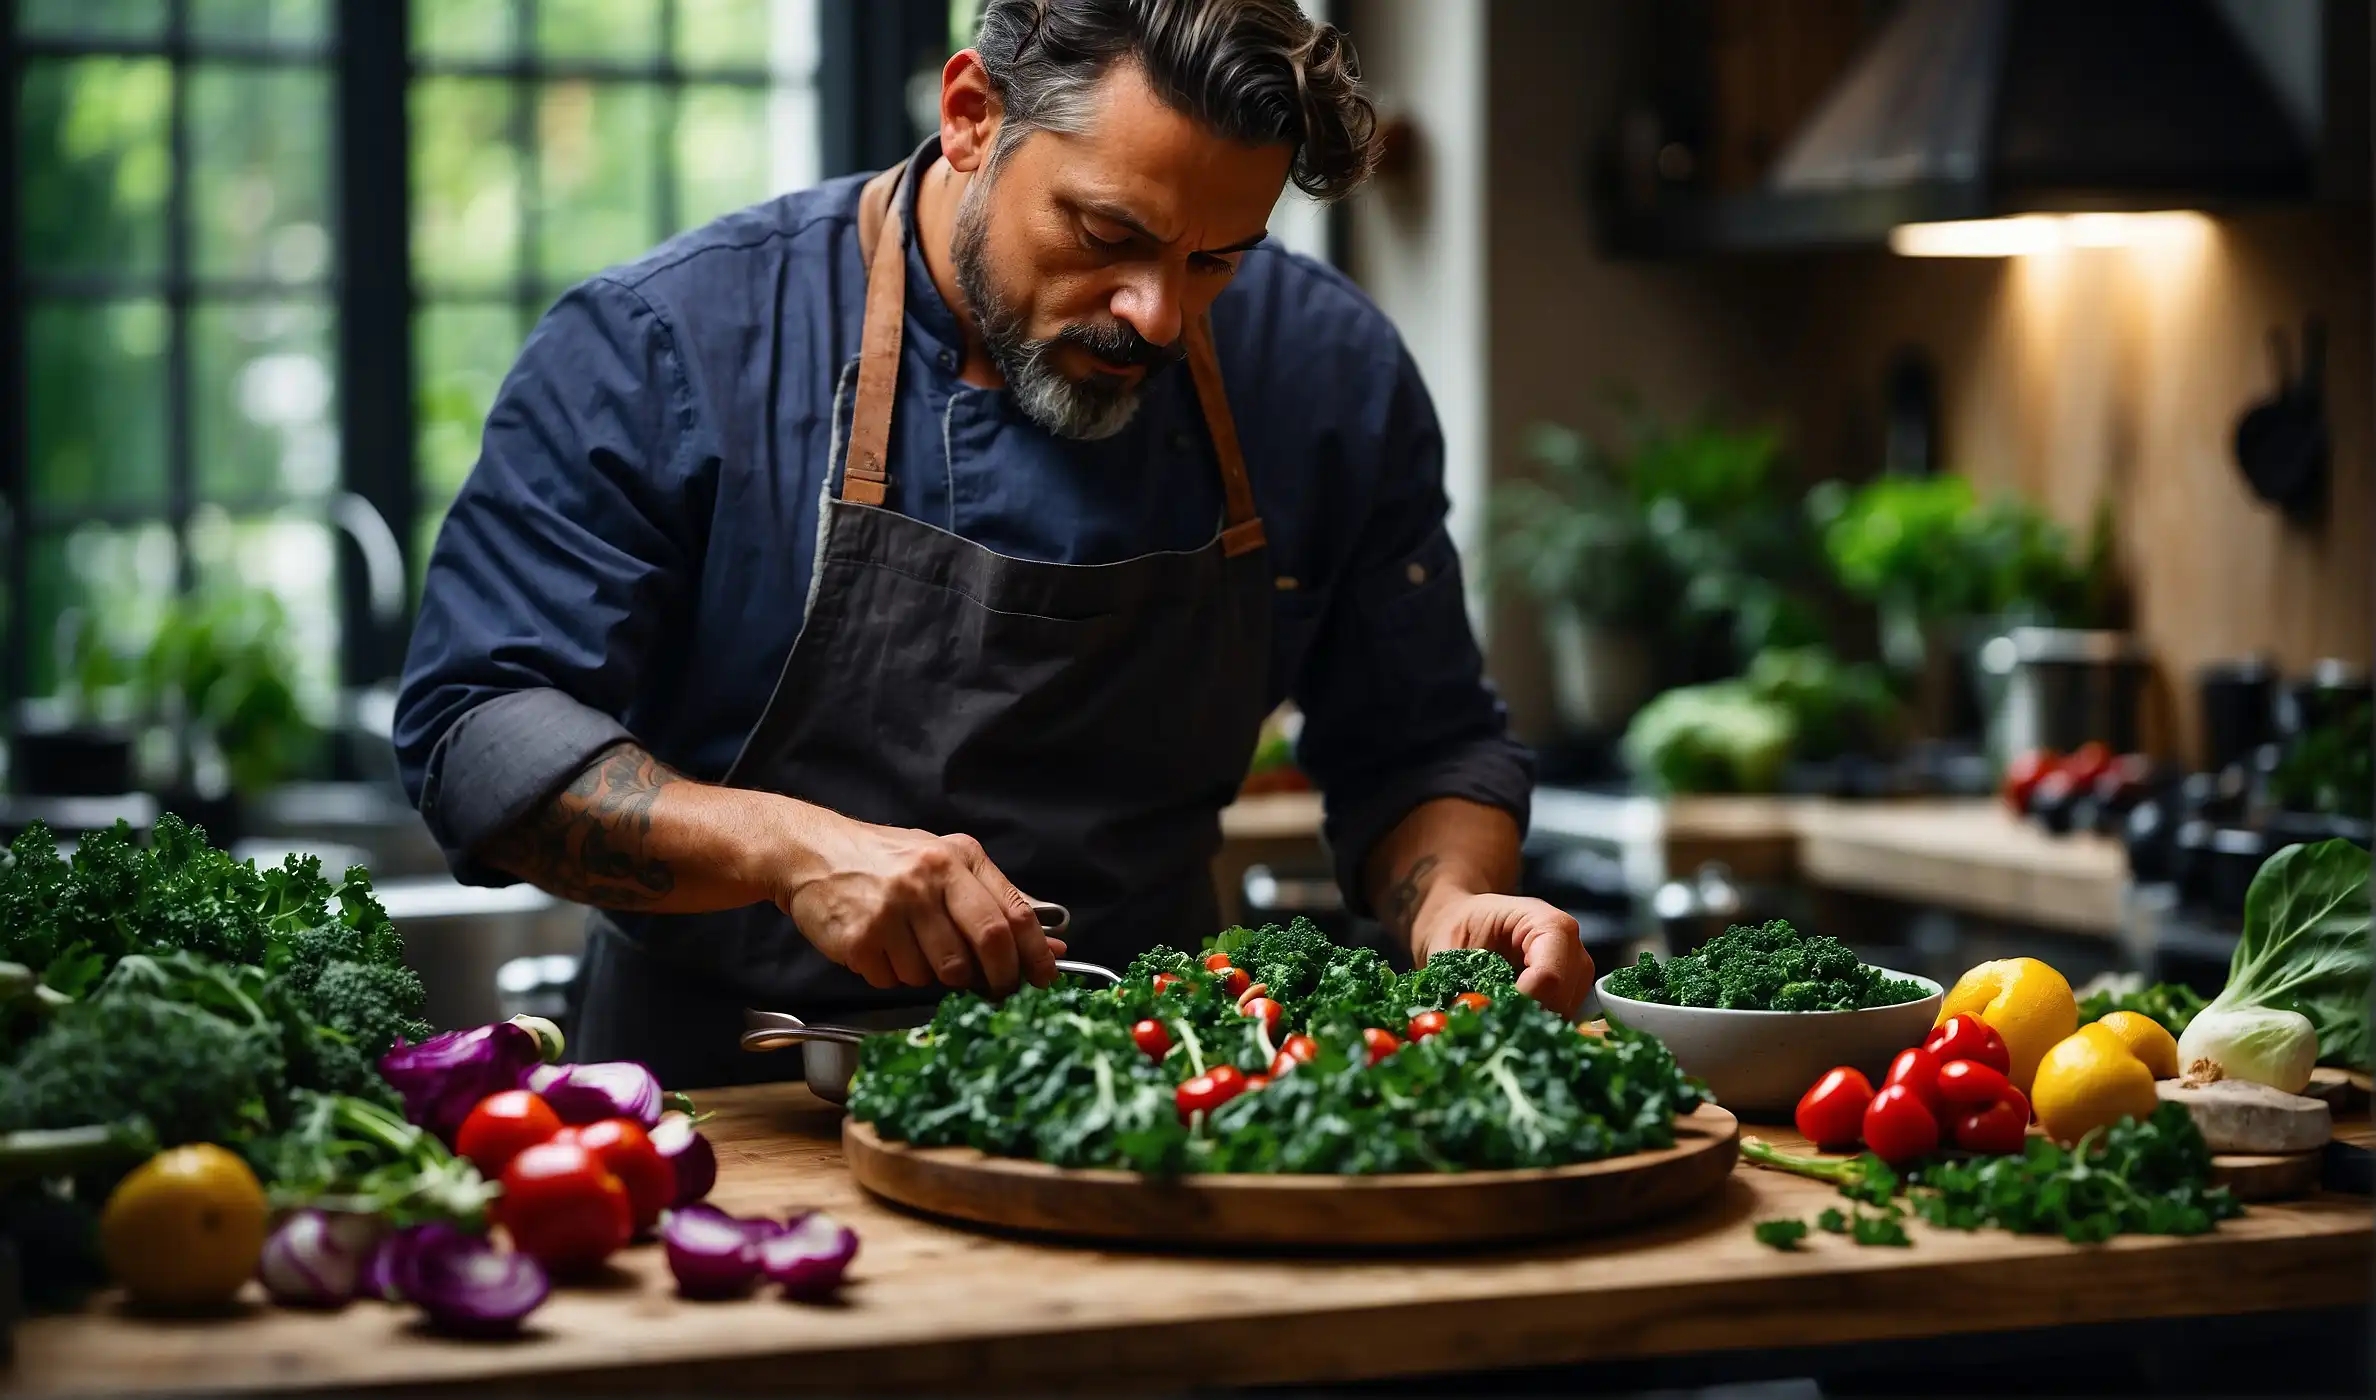 A kitchen scene, a chef preparing a kale salad with fresh ingredients